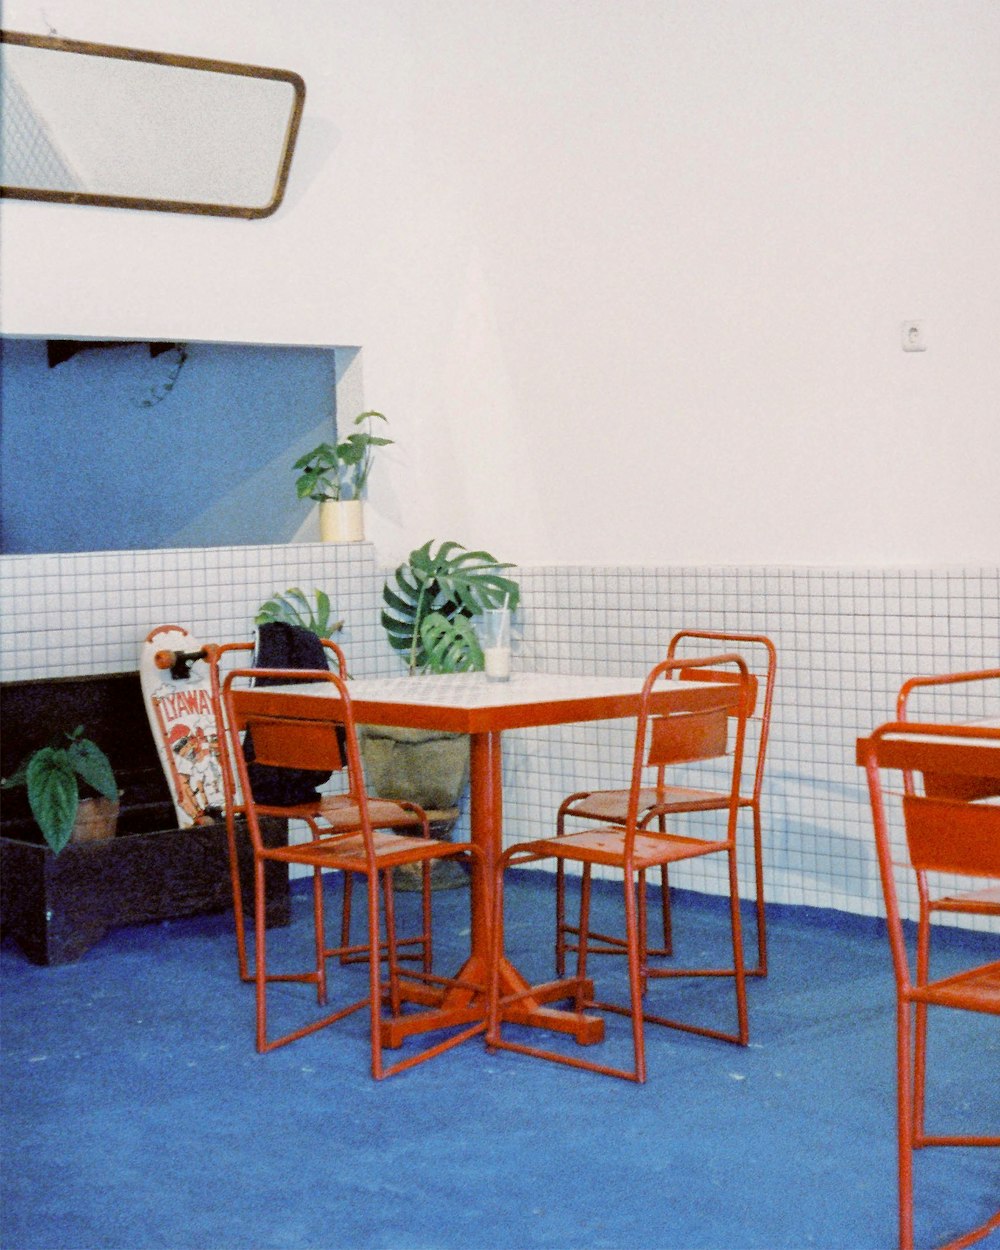 a table and chairs in a room with a blue floor